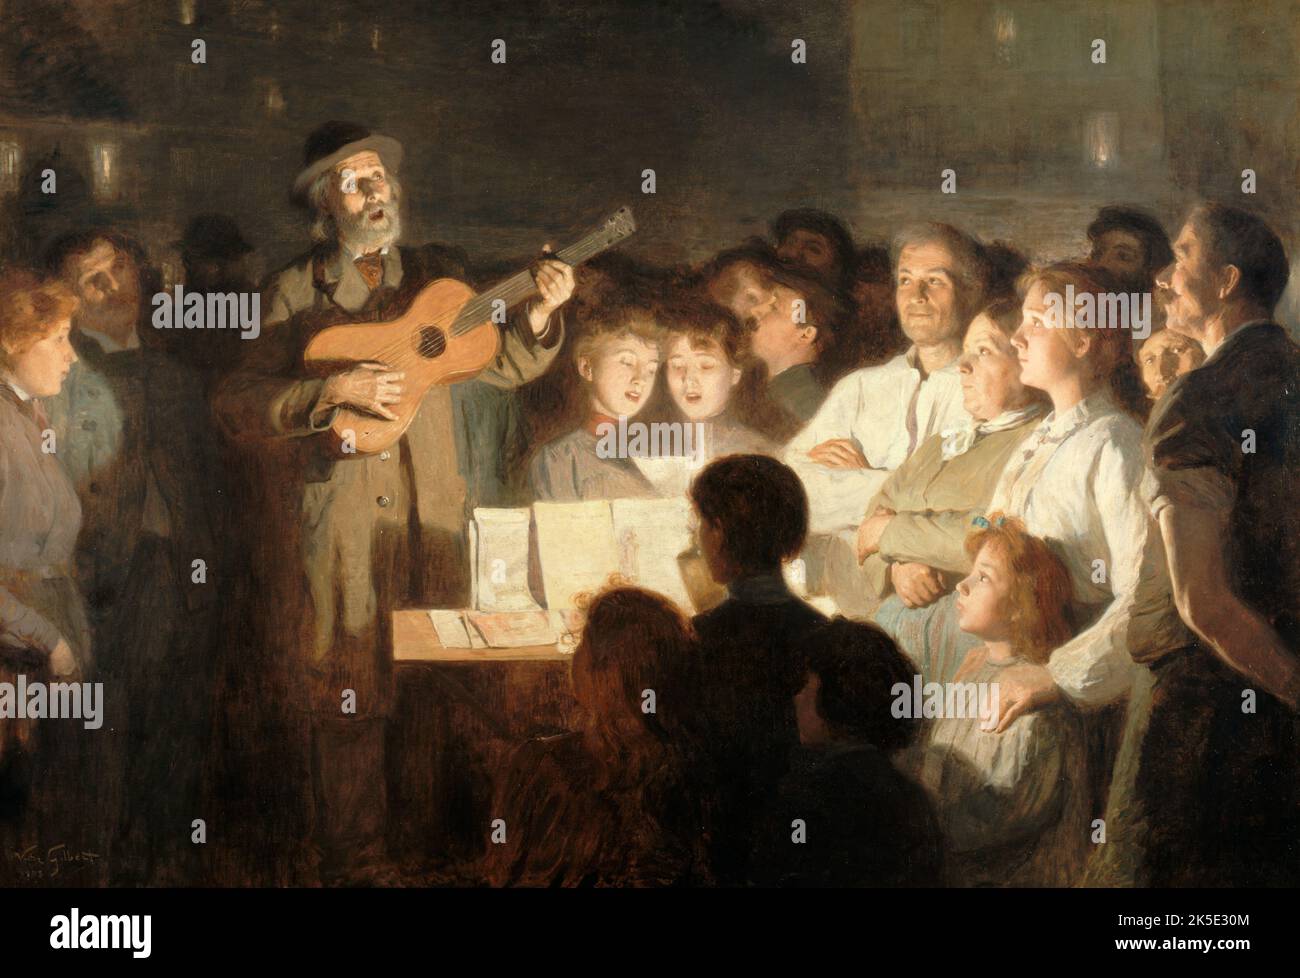 Le marchand de chansons, 1903. Seller of songs. Stock Photo